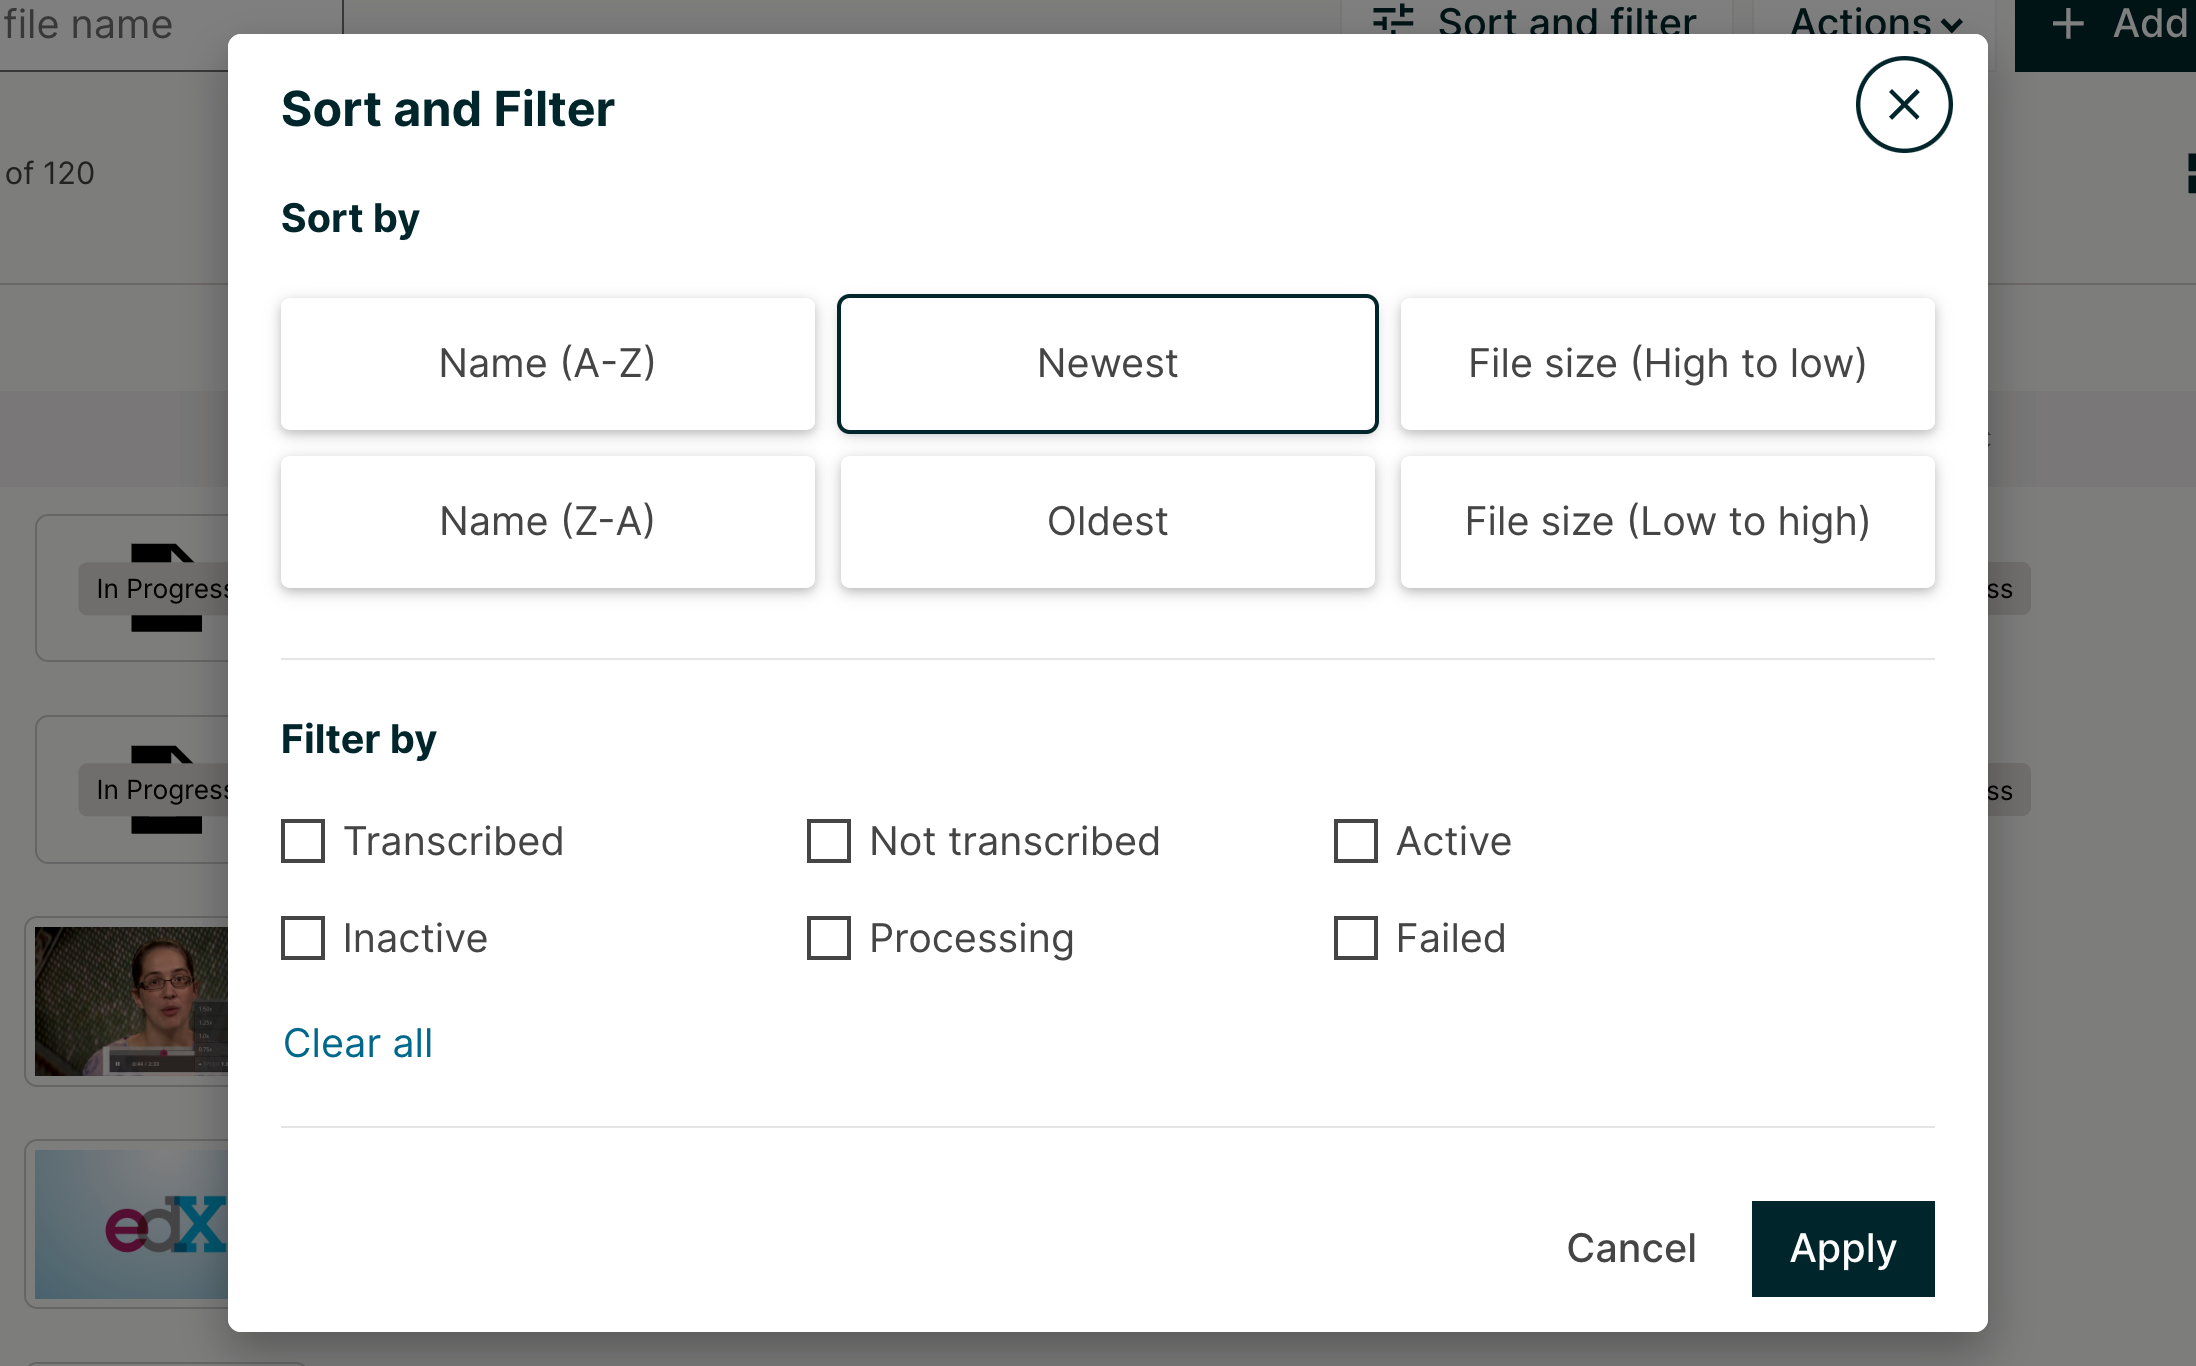 The Sort & Filter button allows you to sort videos by Name (A-Z) or (Z-A), Newest, Oldest, File size (high to low) or (low to high). You can filter by videos that are Transcribed, Not Transcribed, Active, Inactive, Processing, or Failed.